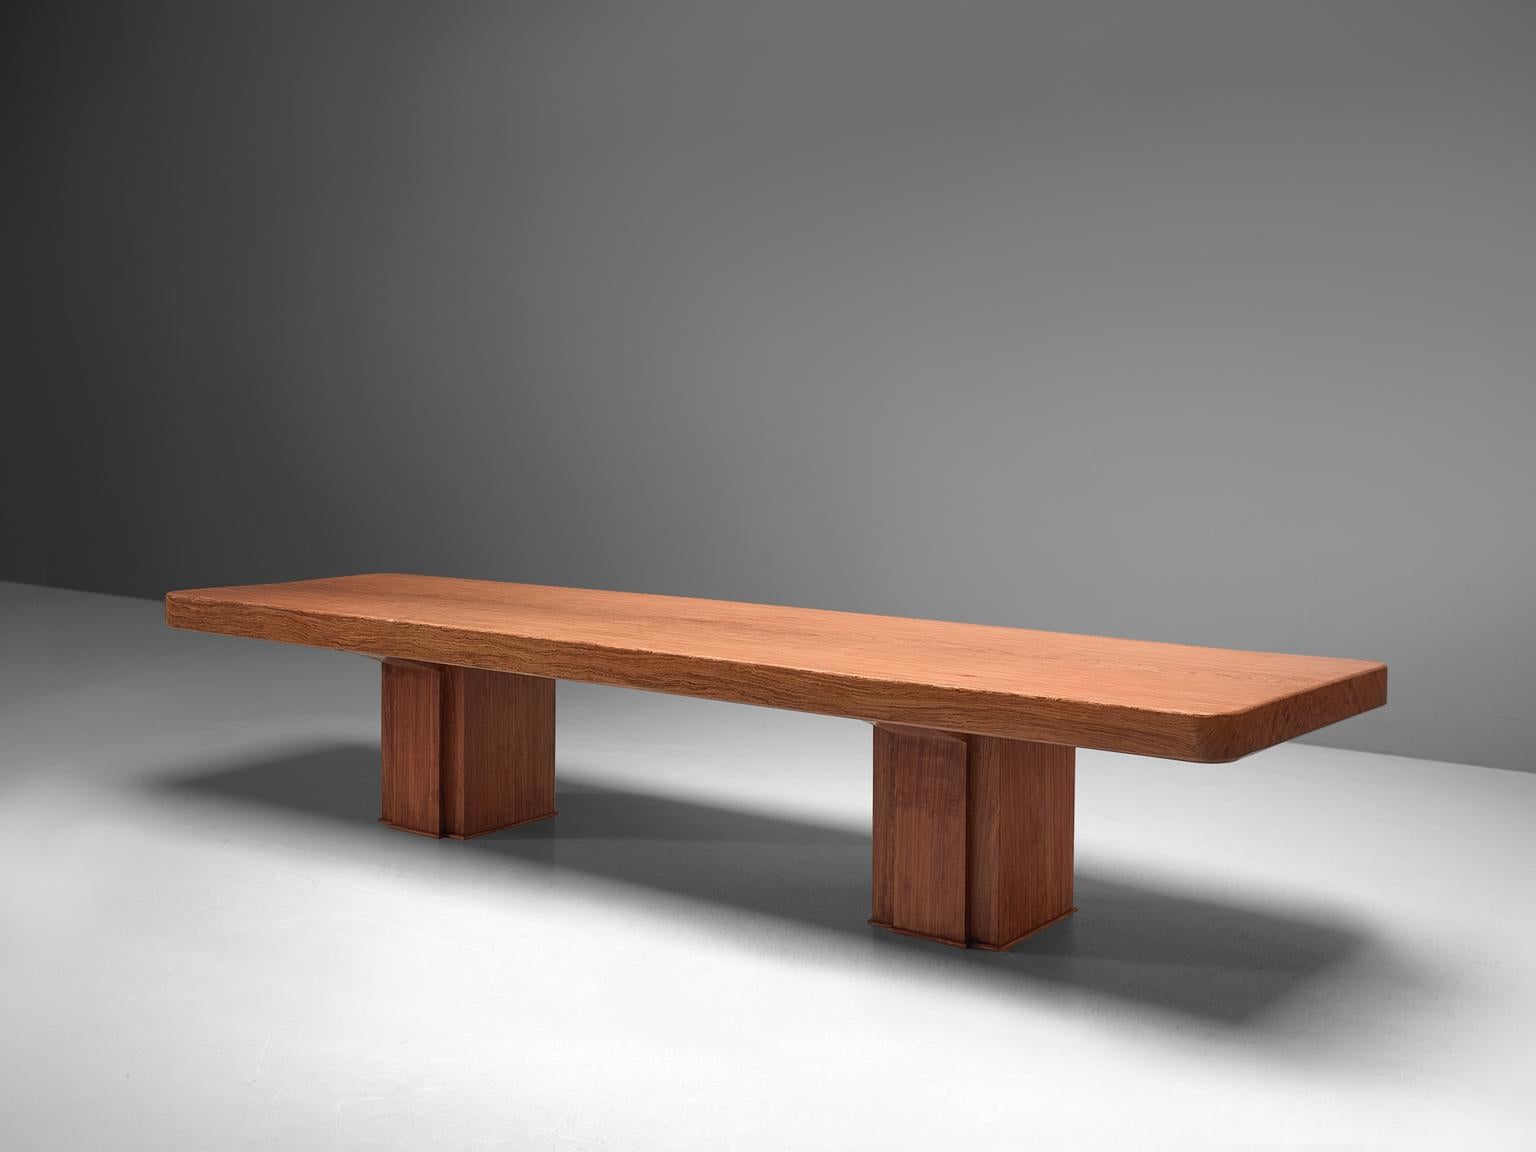 Dining table, bubinga wood, Spain, late1960s. Measures: 4mtr/ 13ft

Grand conference table made of the rare bubinga wood. This protected African hardwood may be loved as much for its quirky name as it is for its strength and beauty. The 4 meter